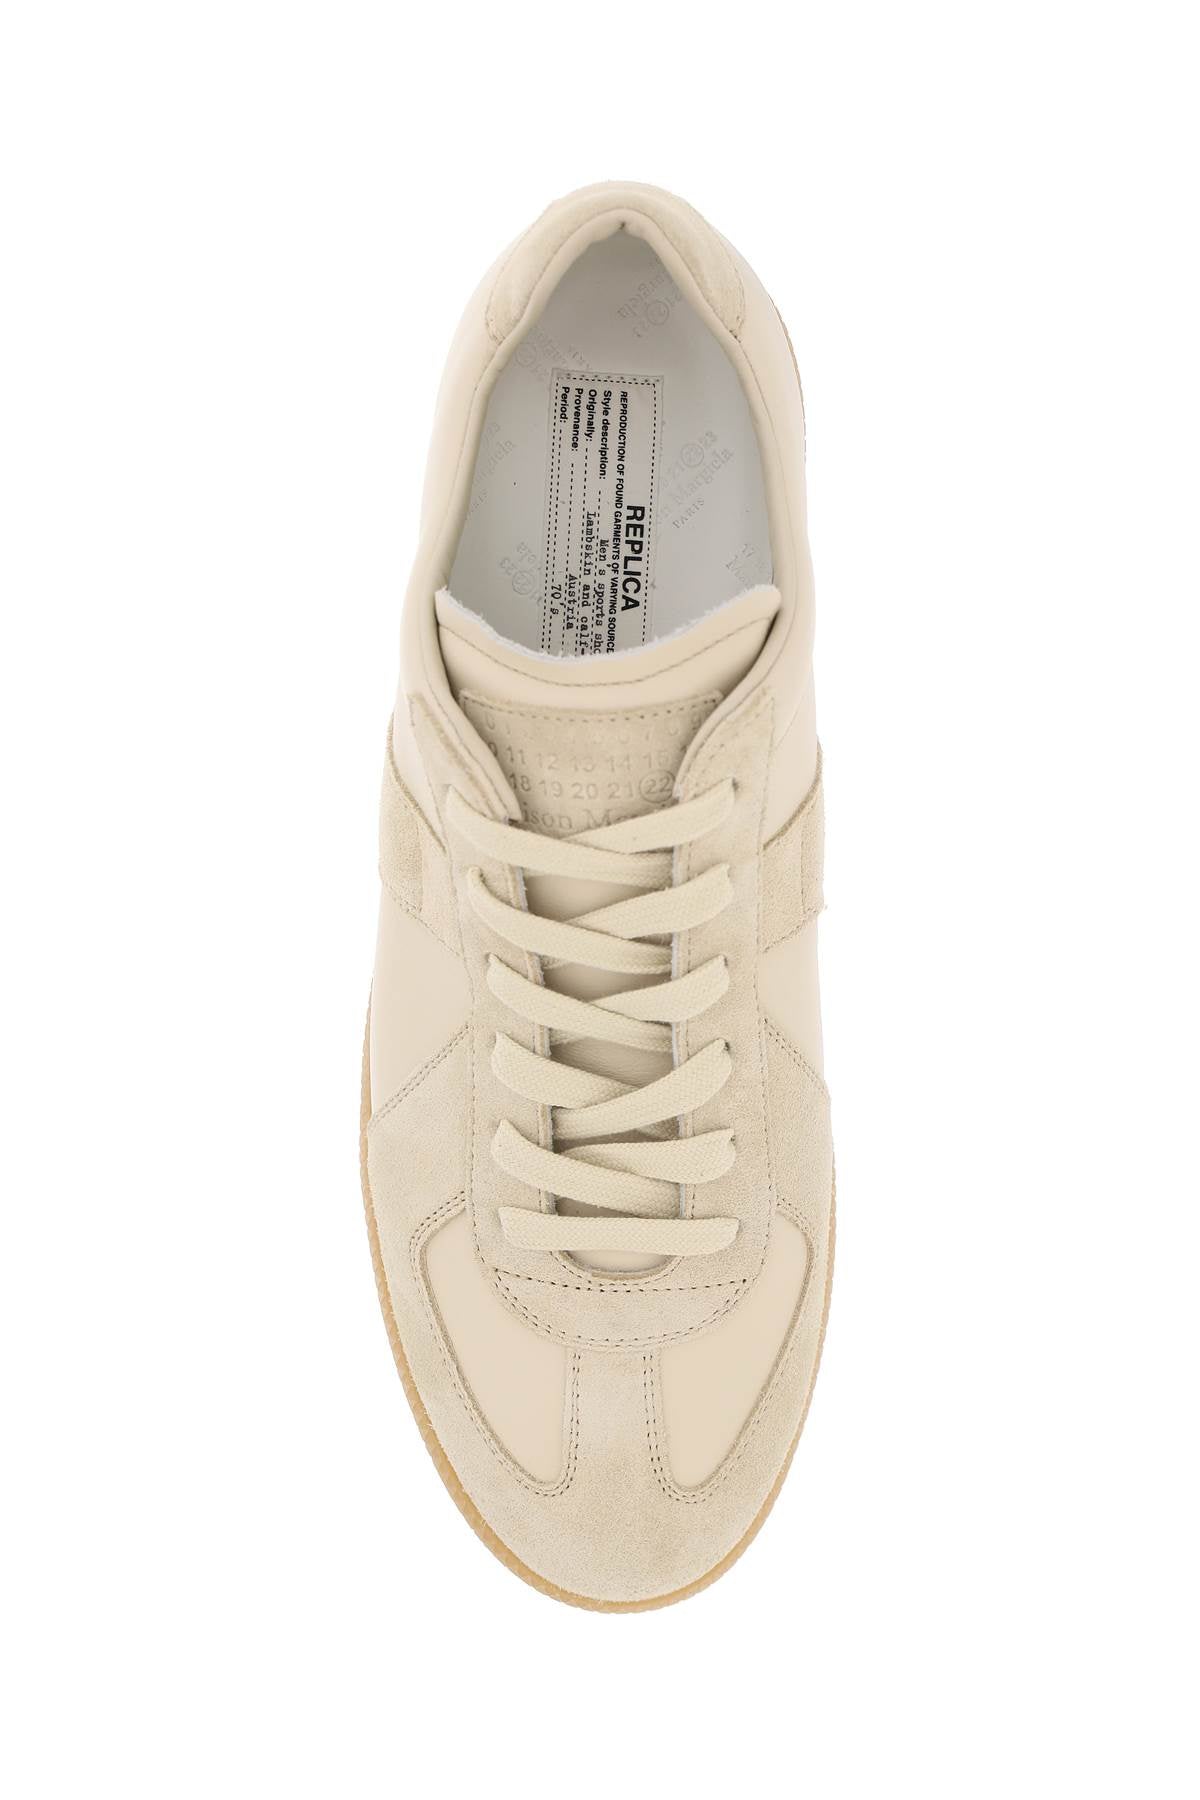 Beige Leather Sneakers with Suede Inserts and Rubber Sole